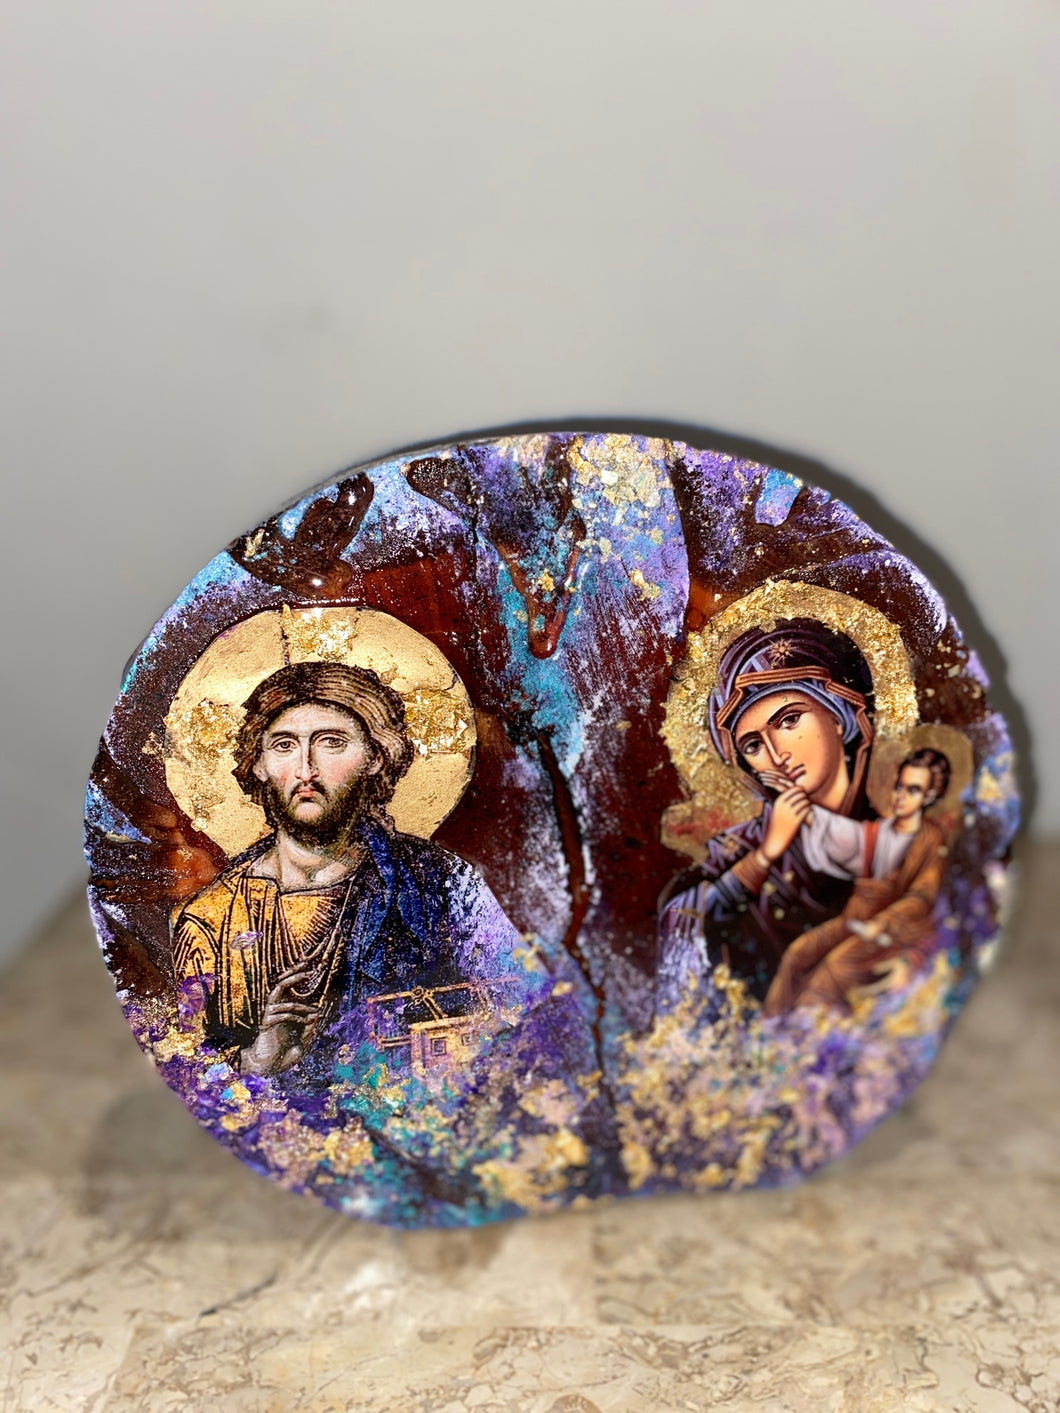 Mother Mary & Jesus Christ- religious wood epoxy resin handmade icon art - Only 1 off - Original